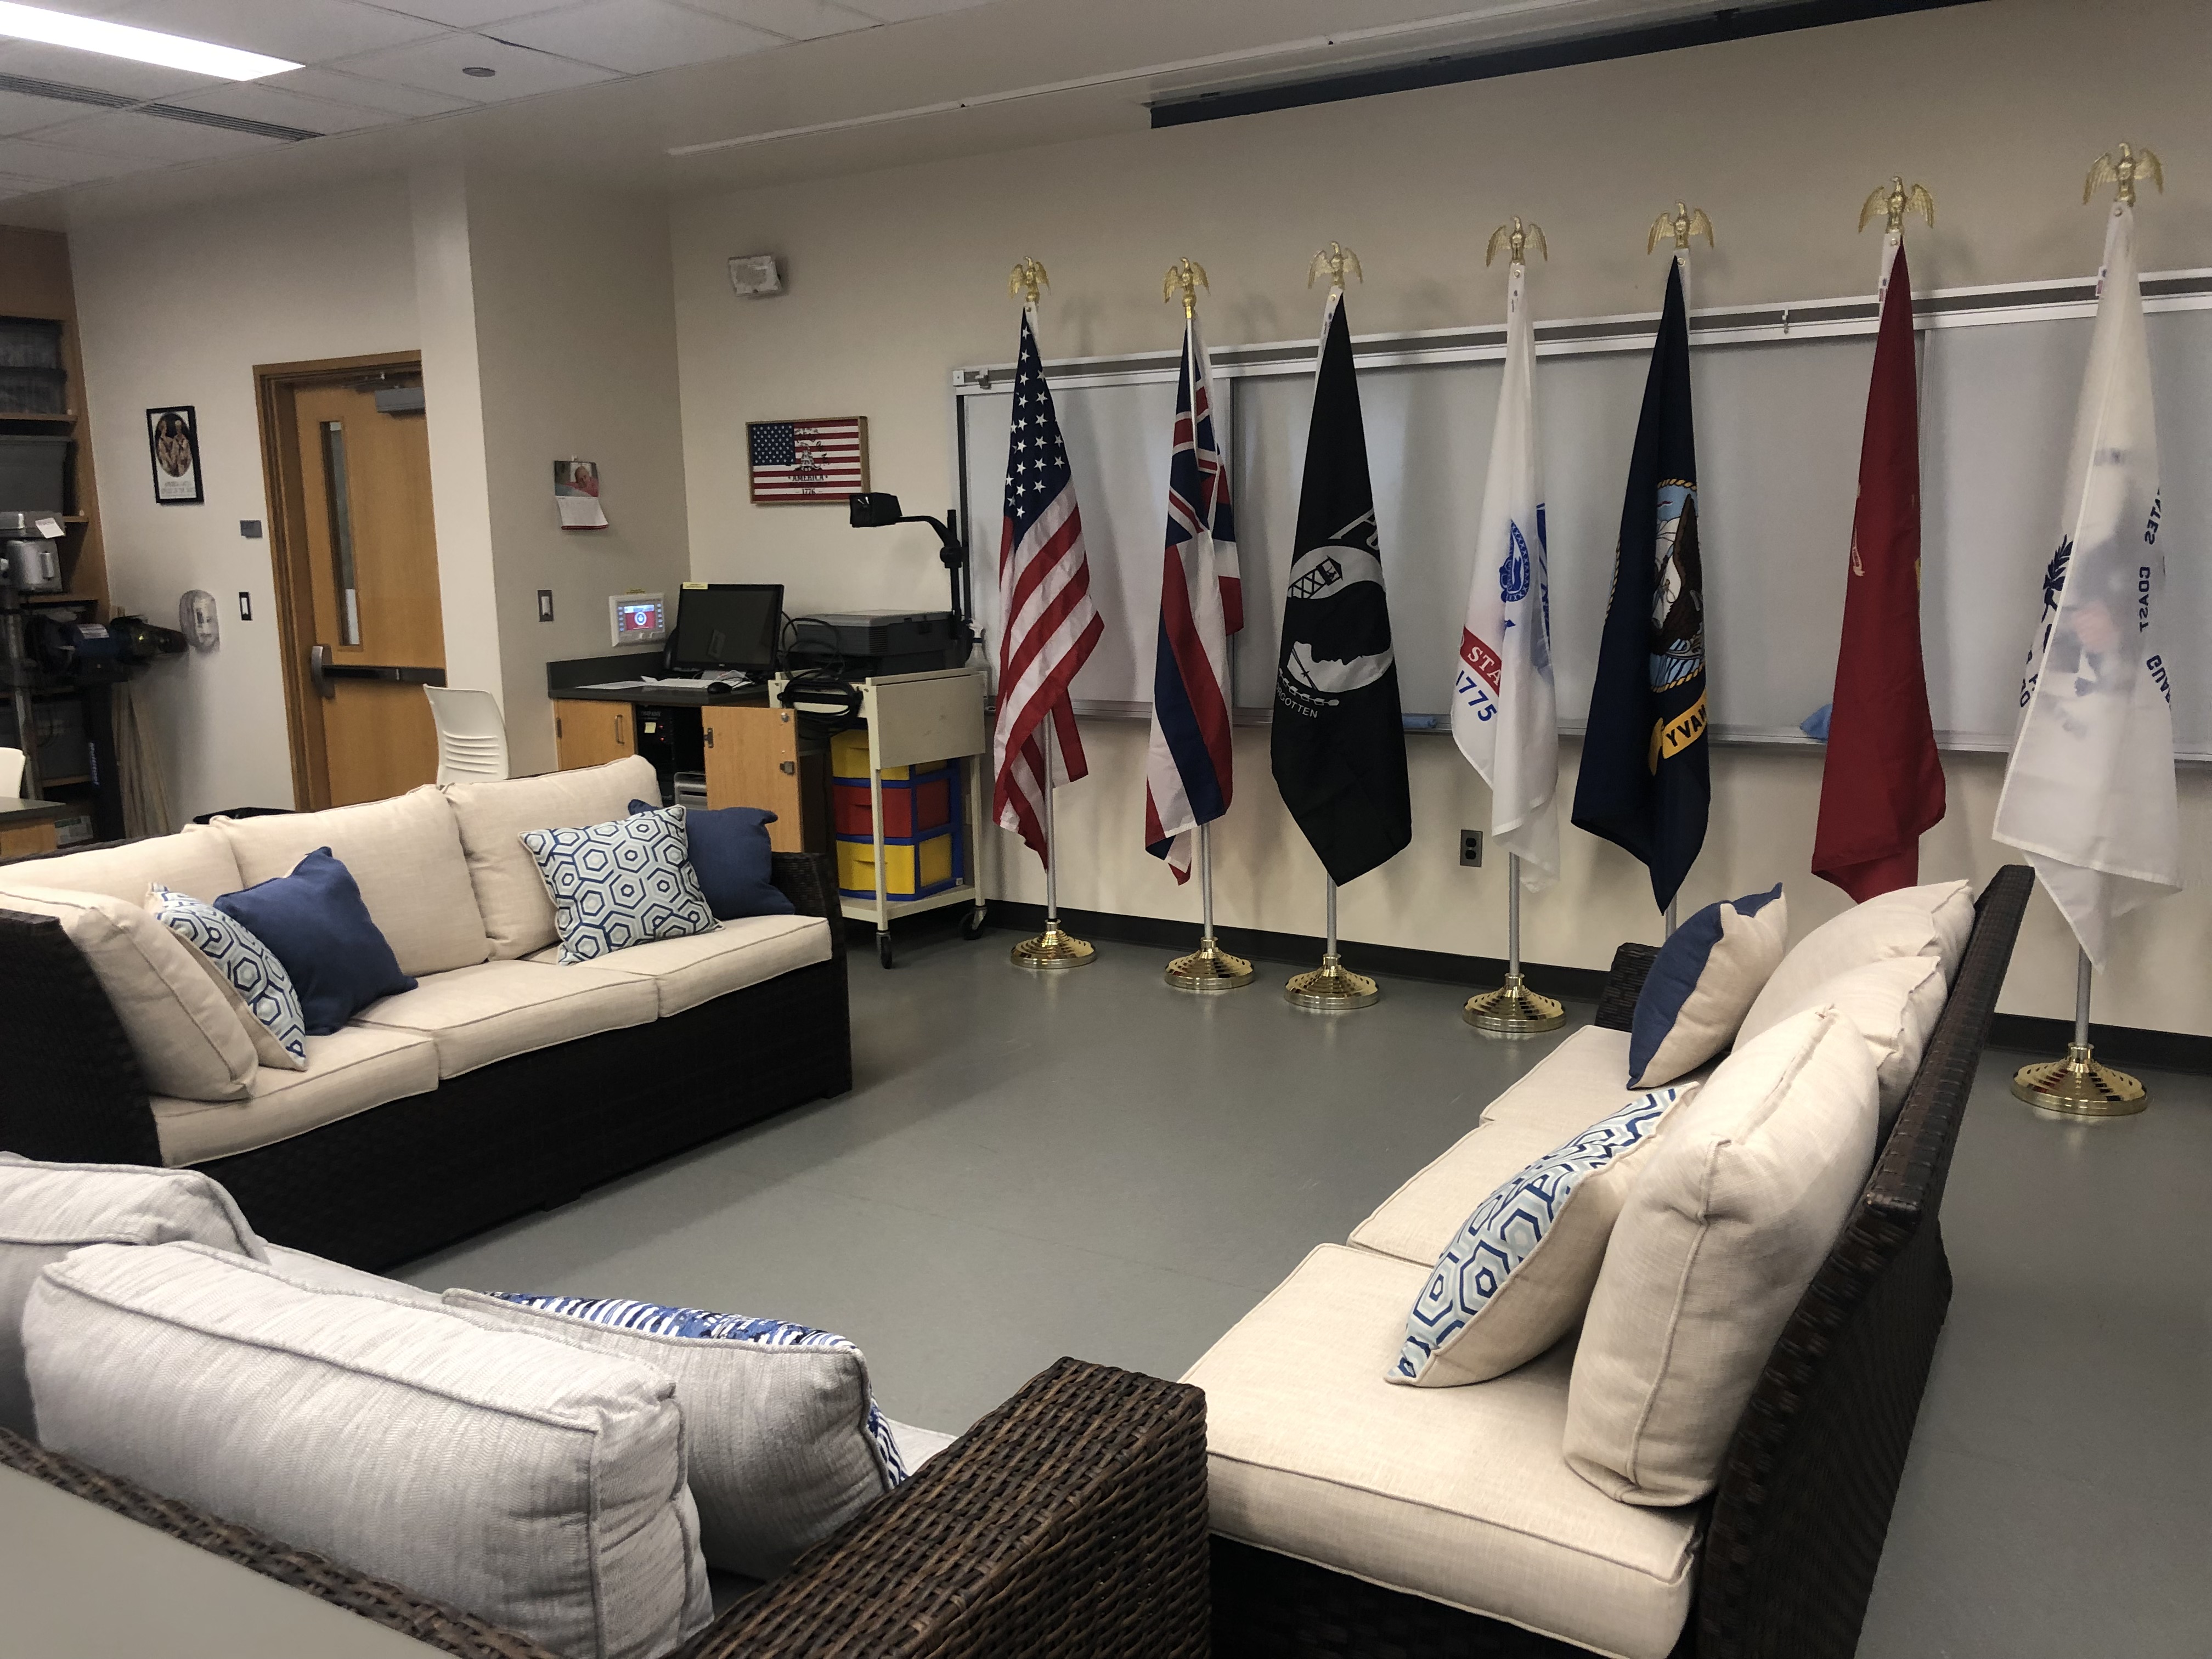 Pictures of couches where students can gather at the UH West O'ahu Veterans Lounge, decorated with flags representing the U.S. Armed Forces.